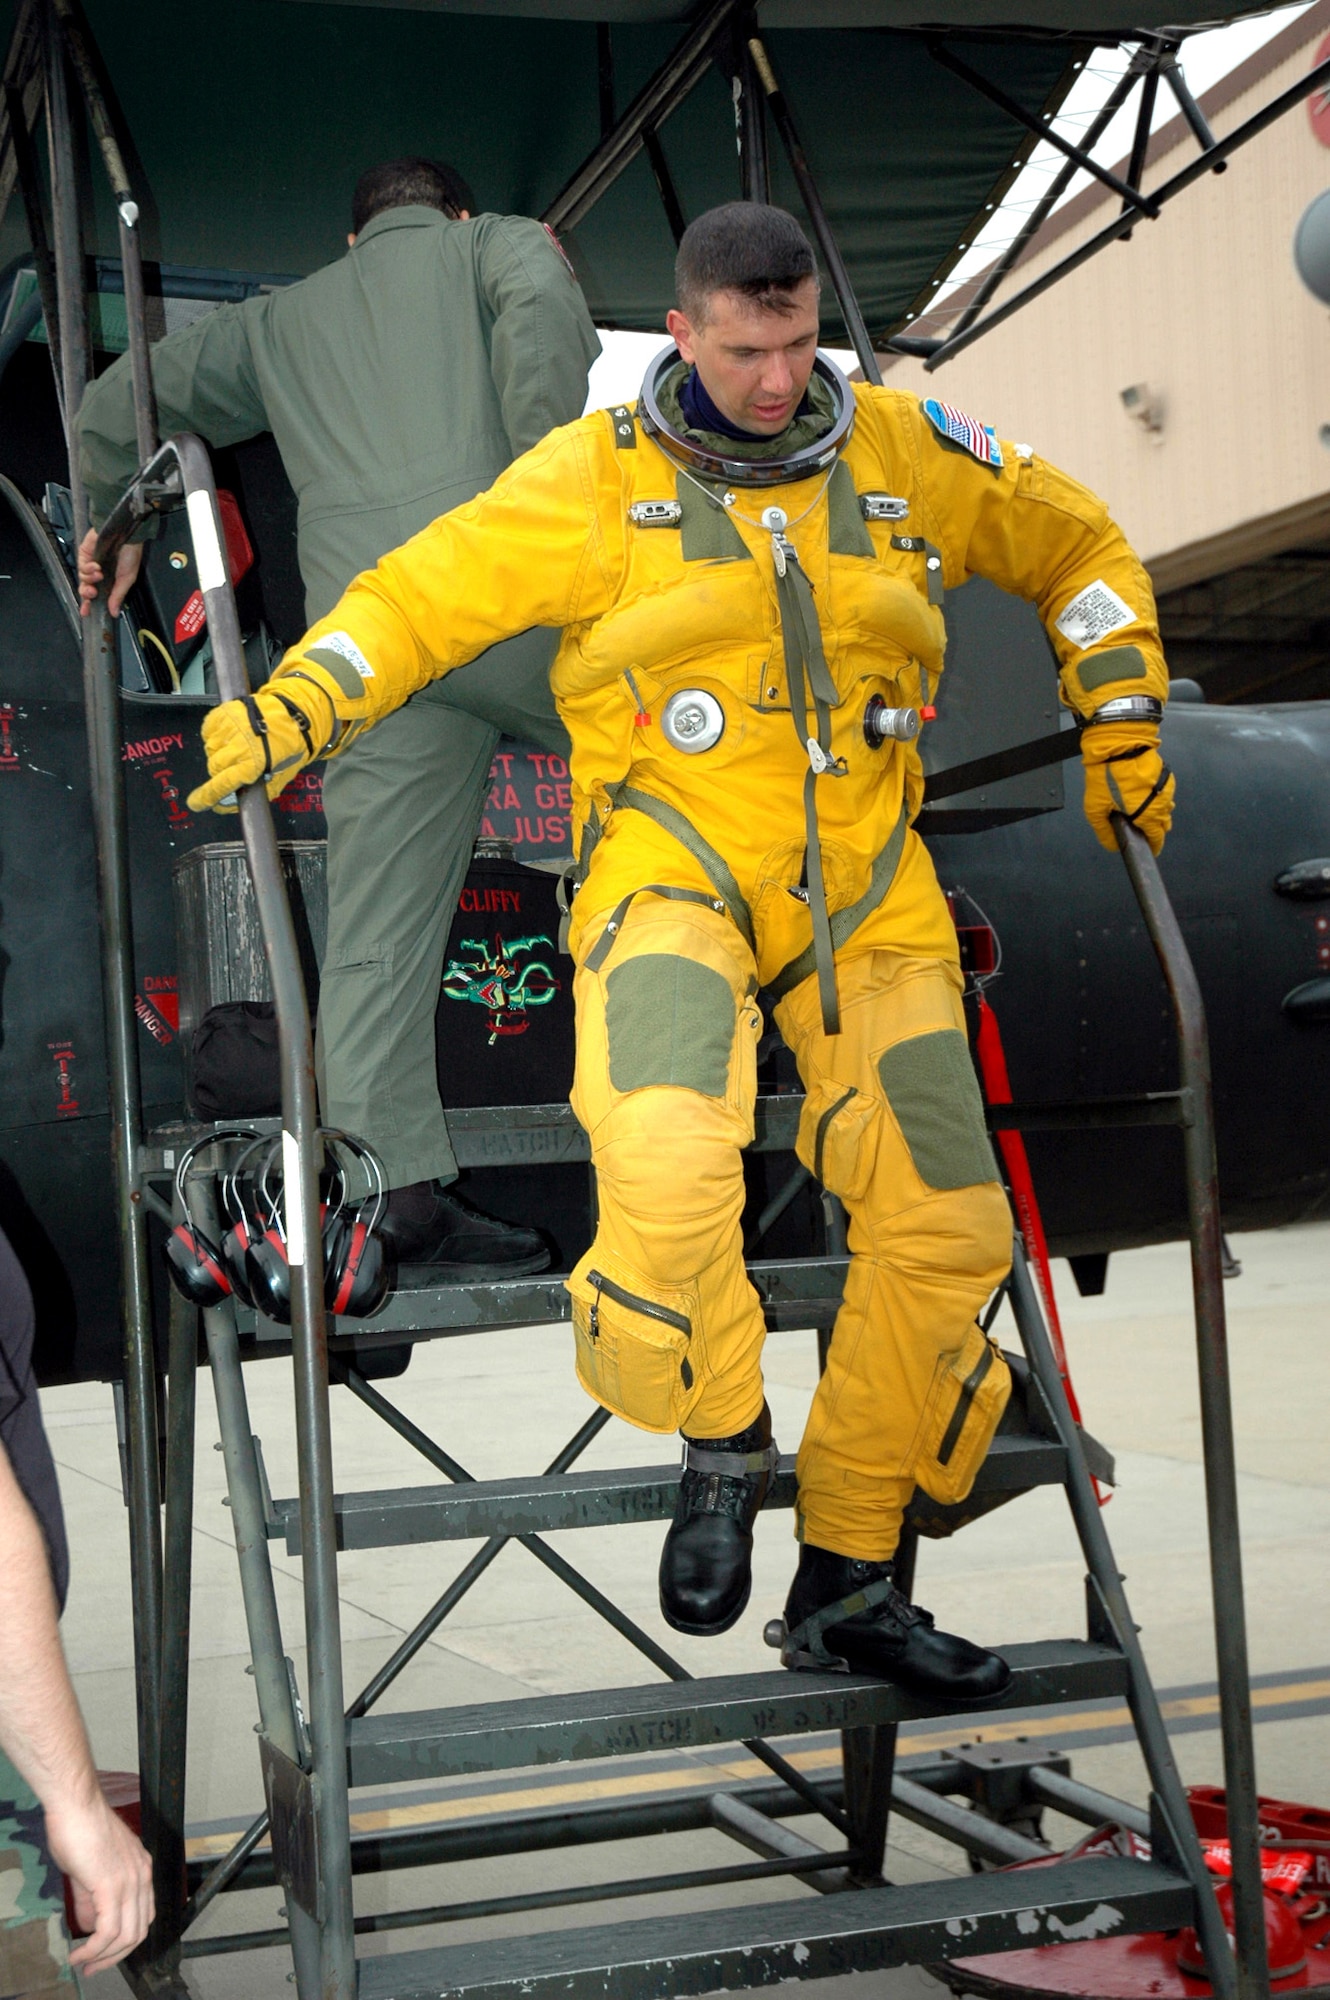 Maj. Michael Clavenna returns to Osan Air Force Base, South Korea, from the last operational reconnaissance flight in the U-2S Dragon Lady, Block 10, aircraft. Major Clavenna is wearing the full pressure suit required for wear by U-2 pilots because of their high-altitude reconnaissance missions. Major Clavenna is the 5th Reconnaissance Squadron assistant director of operations. (U.S. Air Force photo/Staff Sgt. Andrea Knudson) 